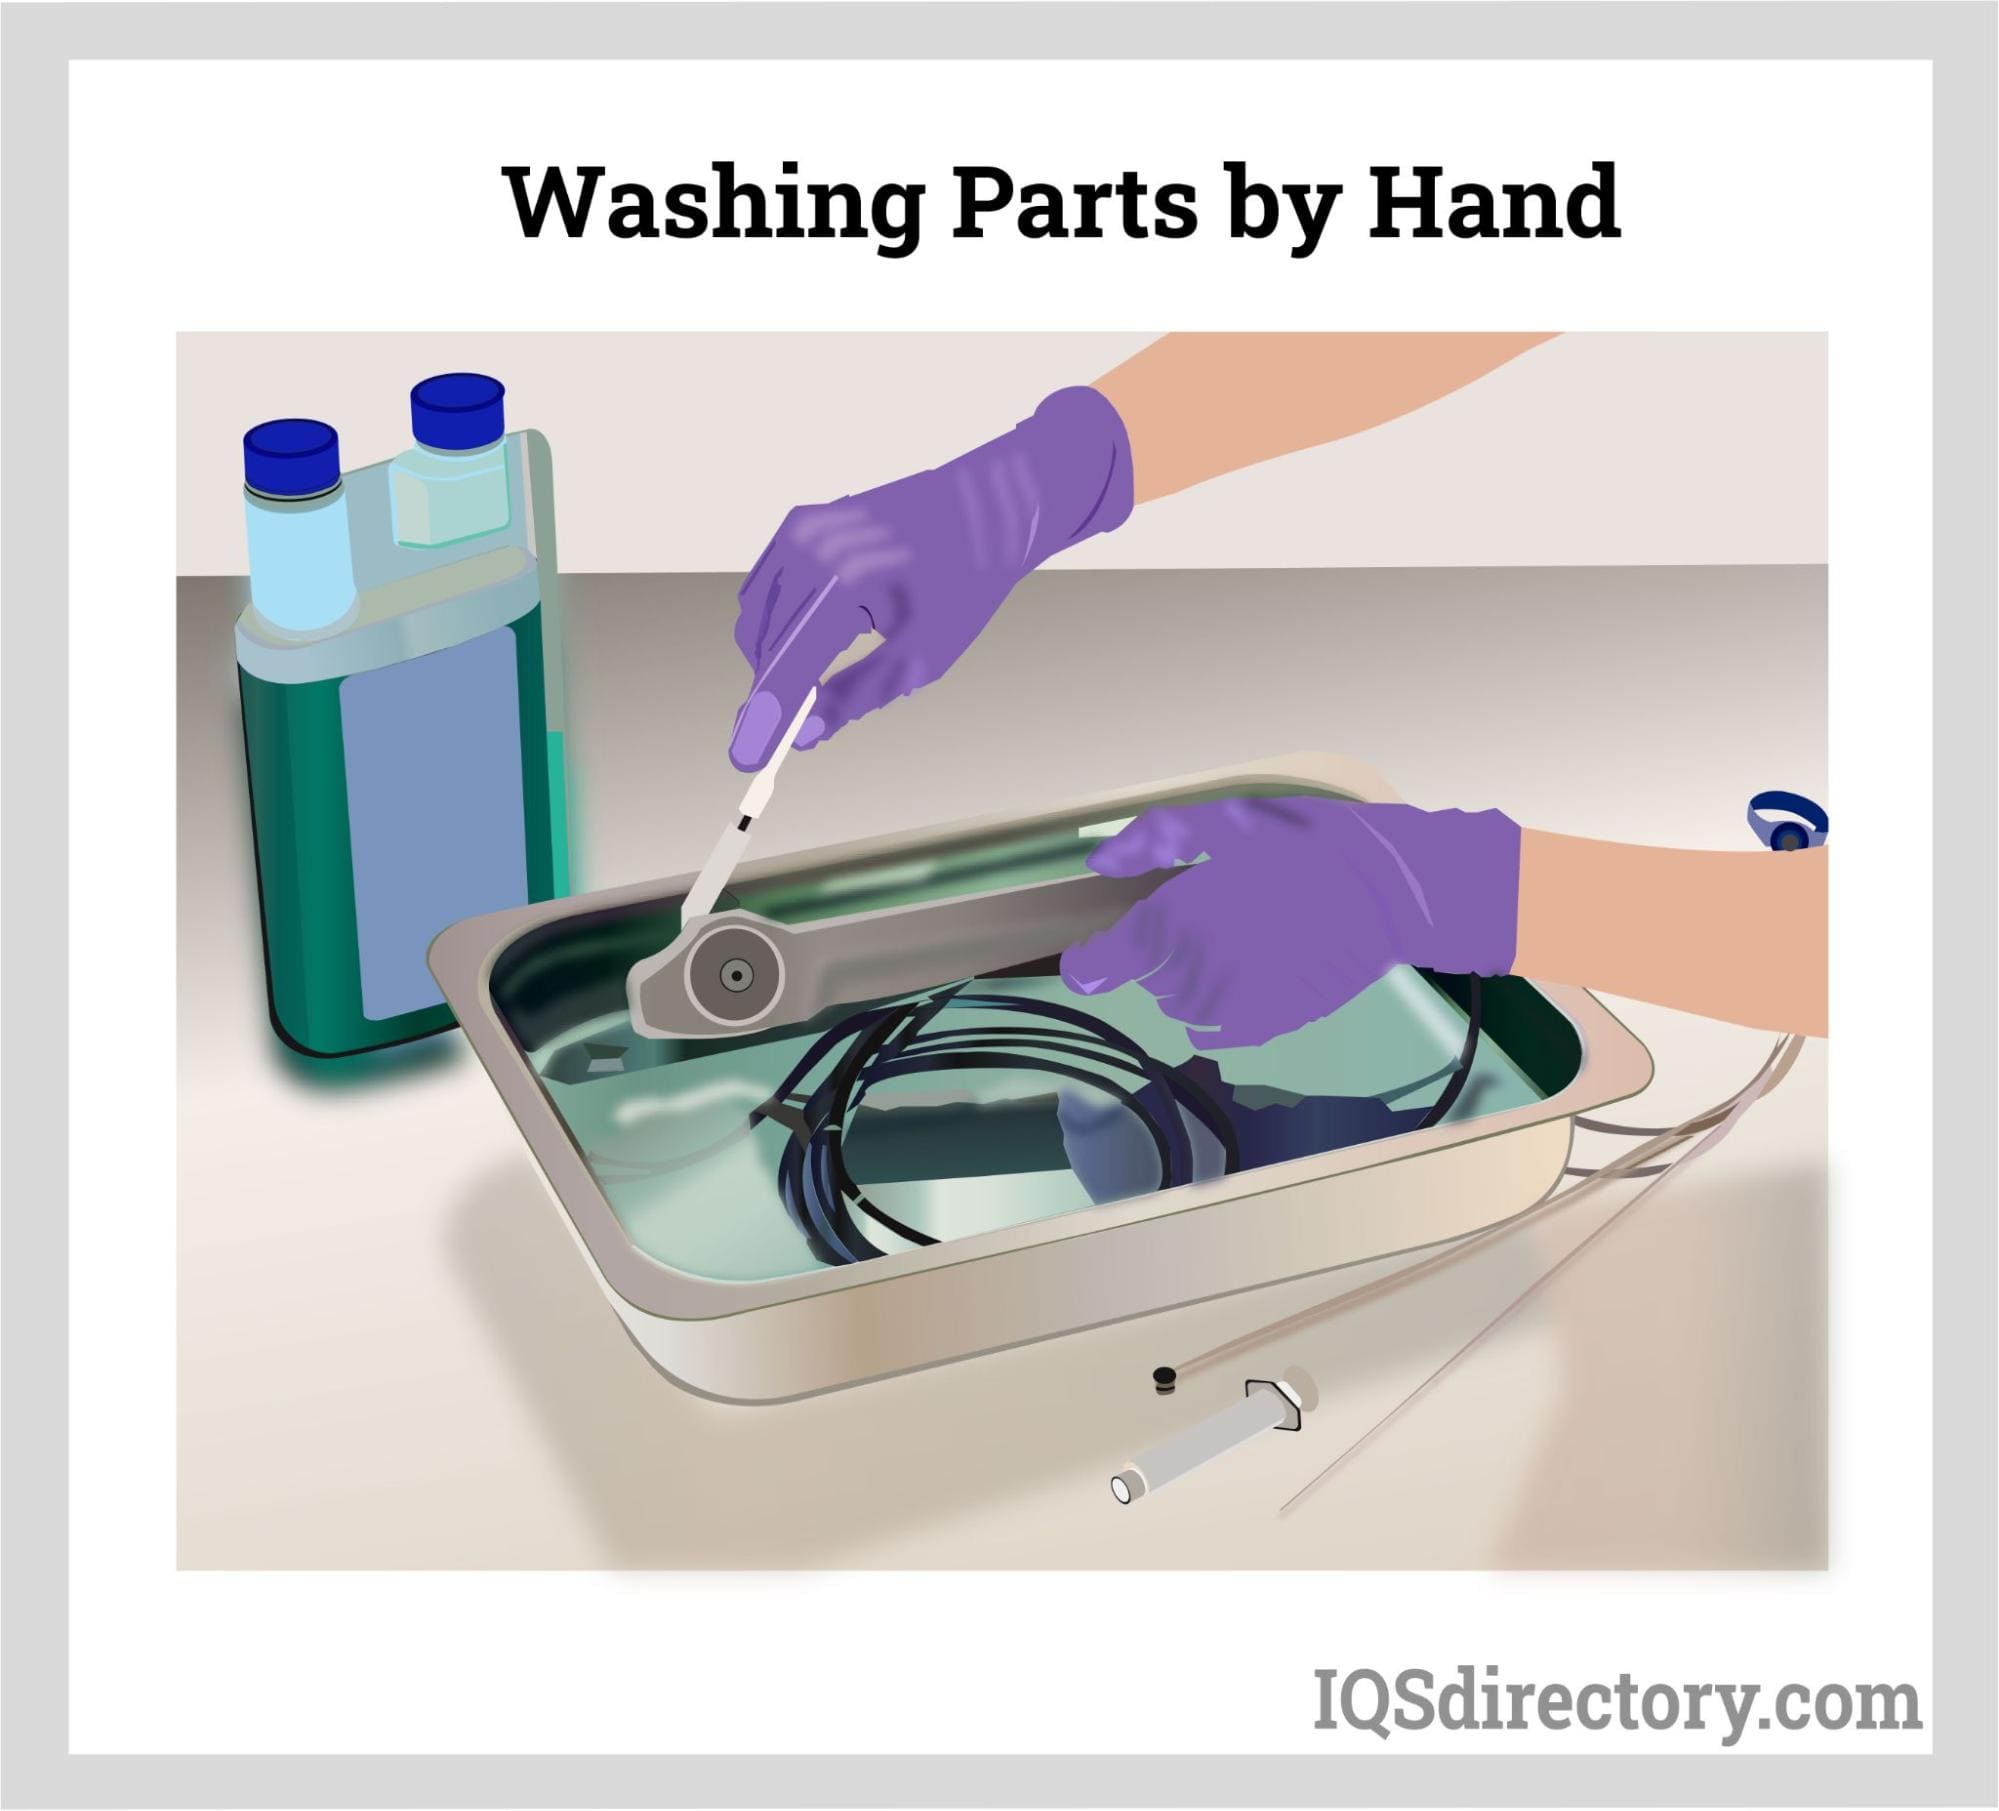 Washing Parts by Hand